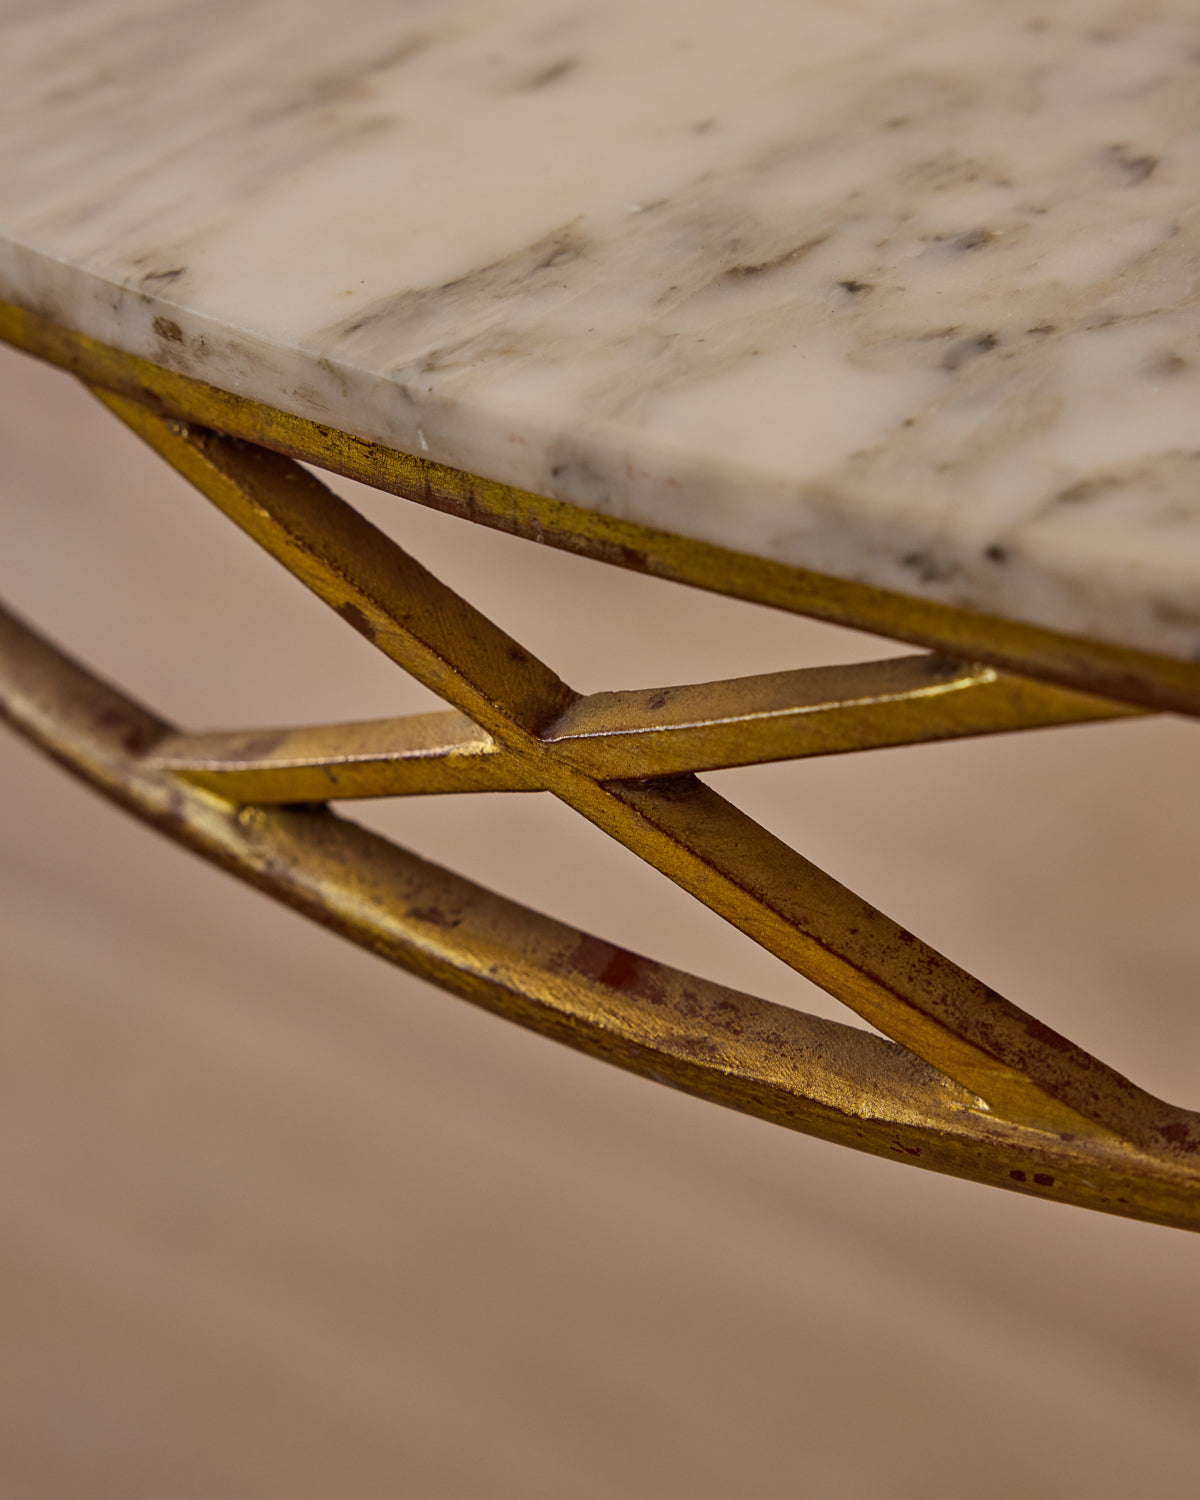 Hollywood Regency Style Marble Dining Table